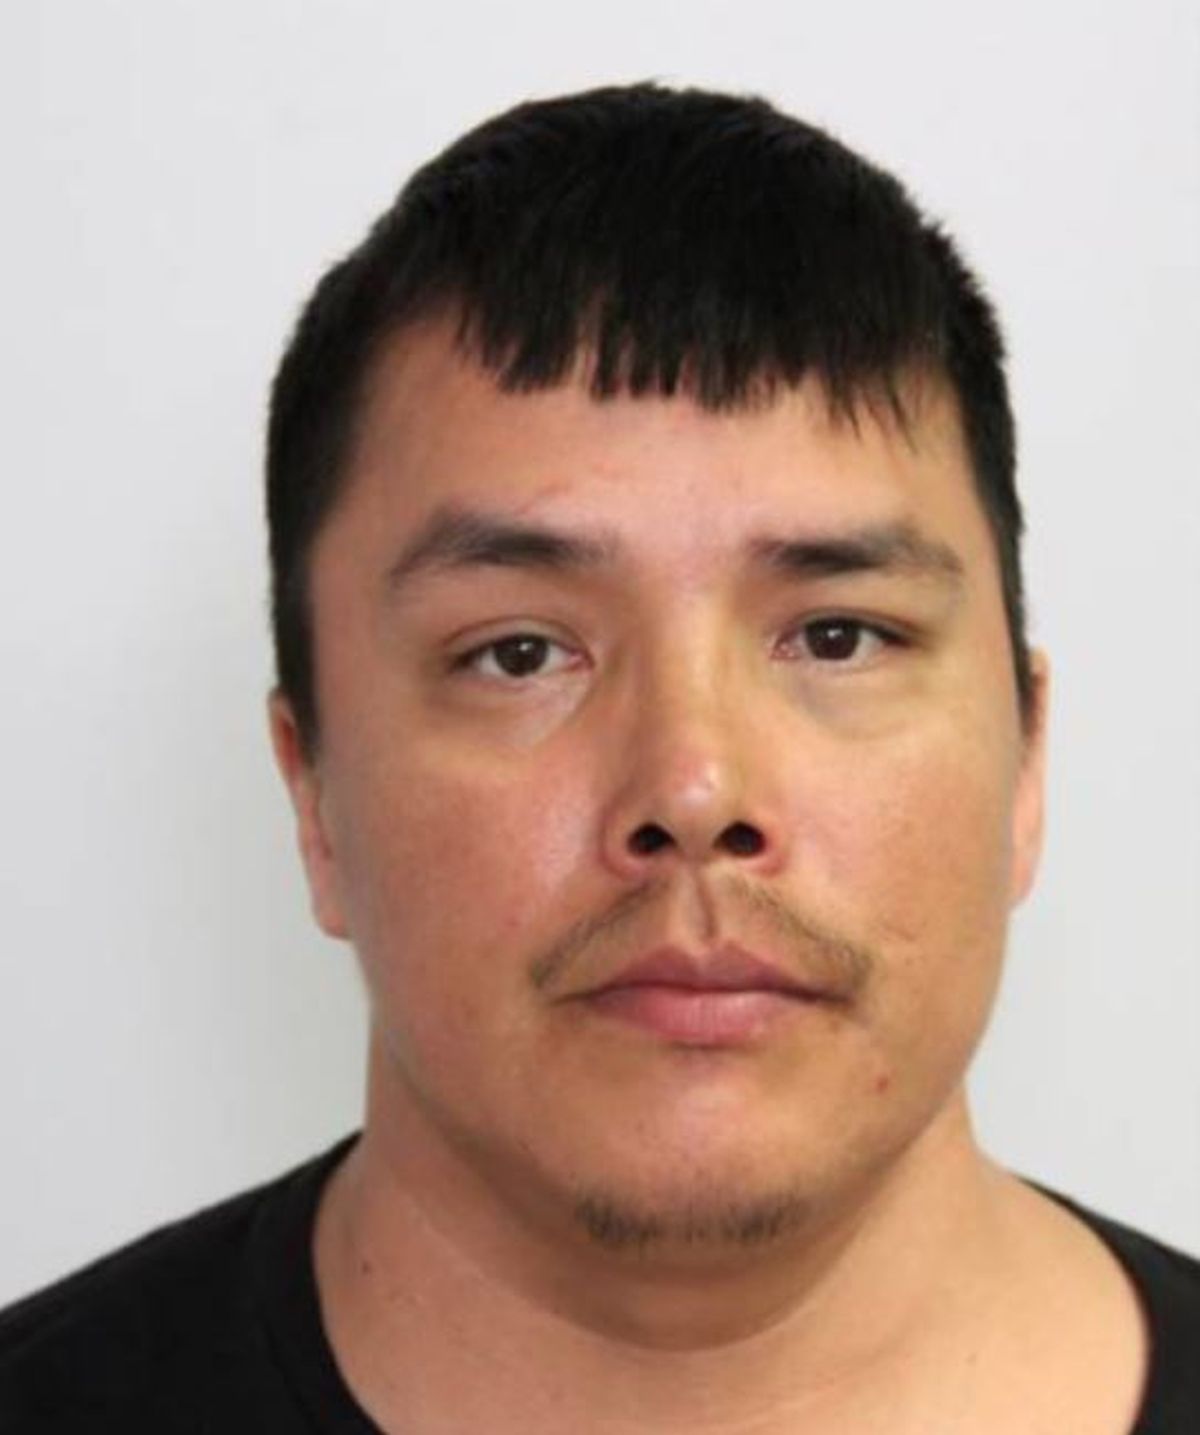 Police in central Alberta say Conrad Cardinal is a suspect in an assault that occurred in Saddle Lake on April 7.